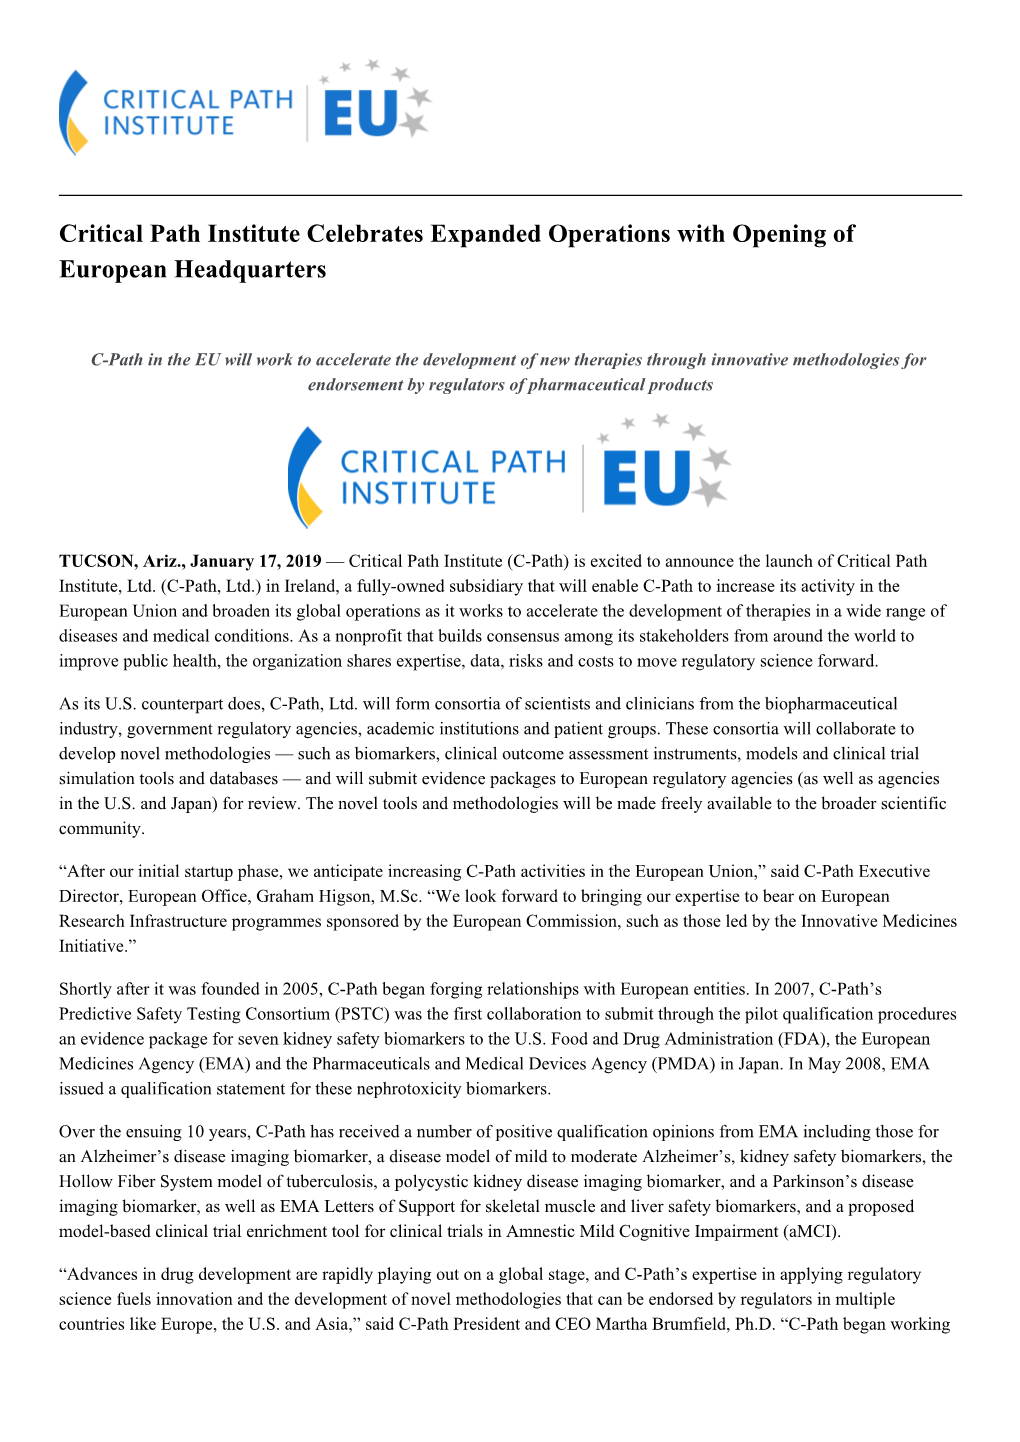 Critical Path Institute Celebrates Expanded Operations with Opening of European Headquarters